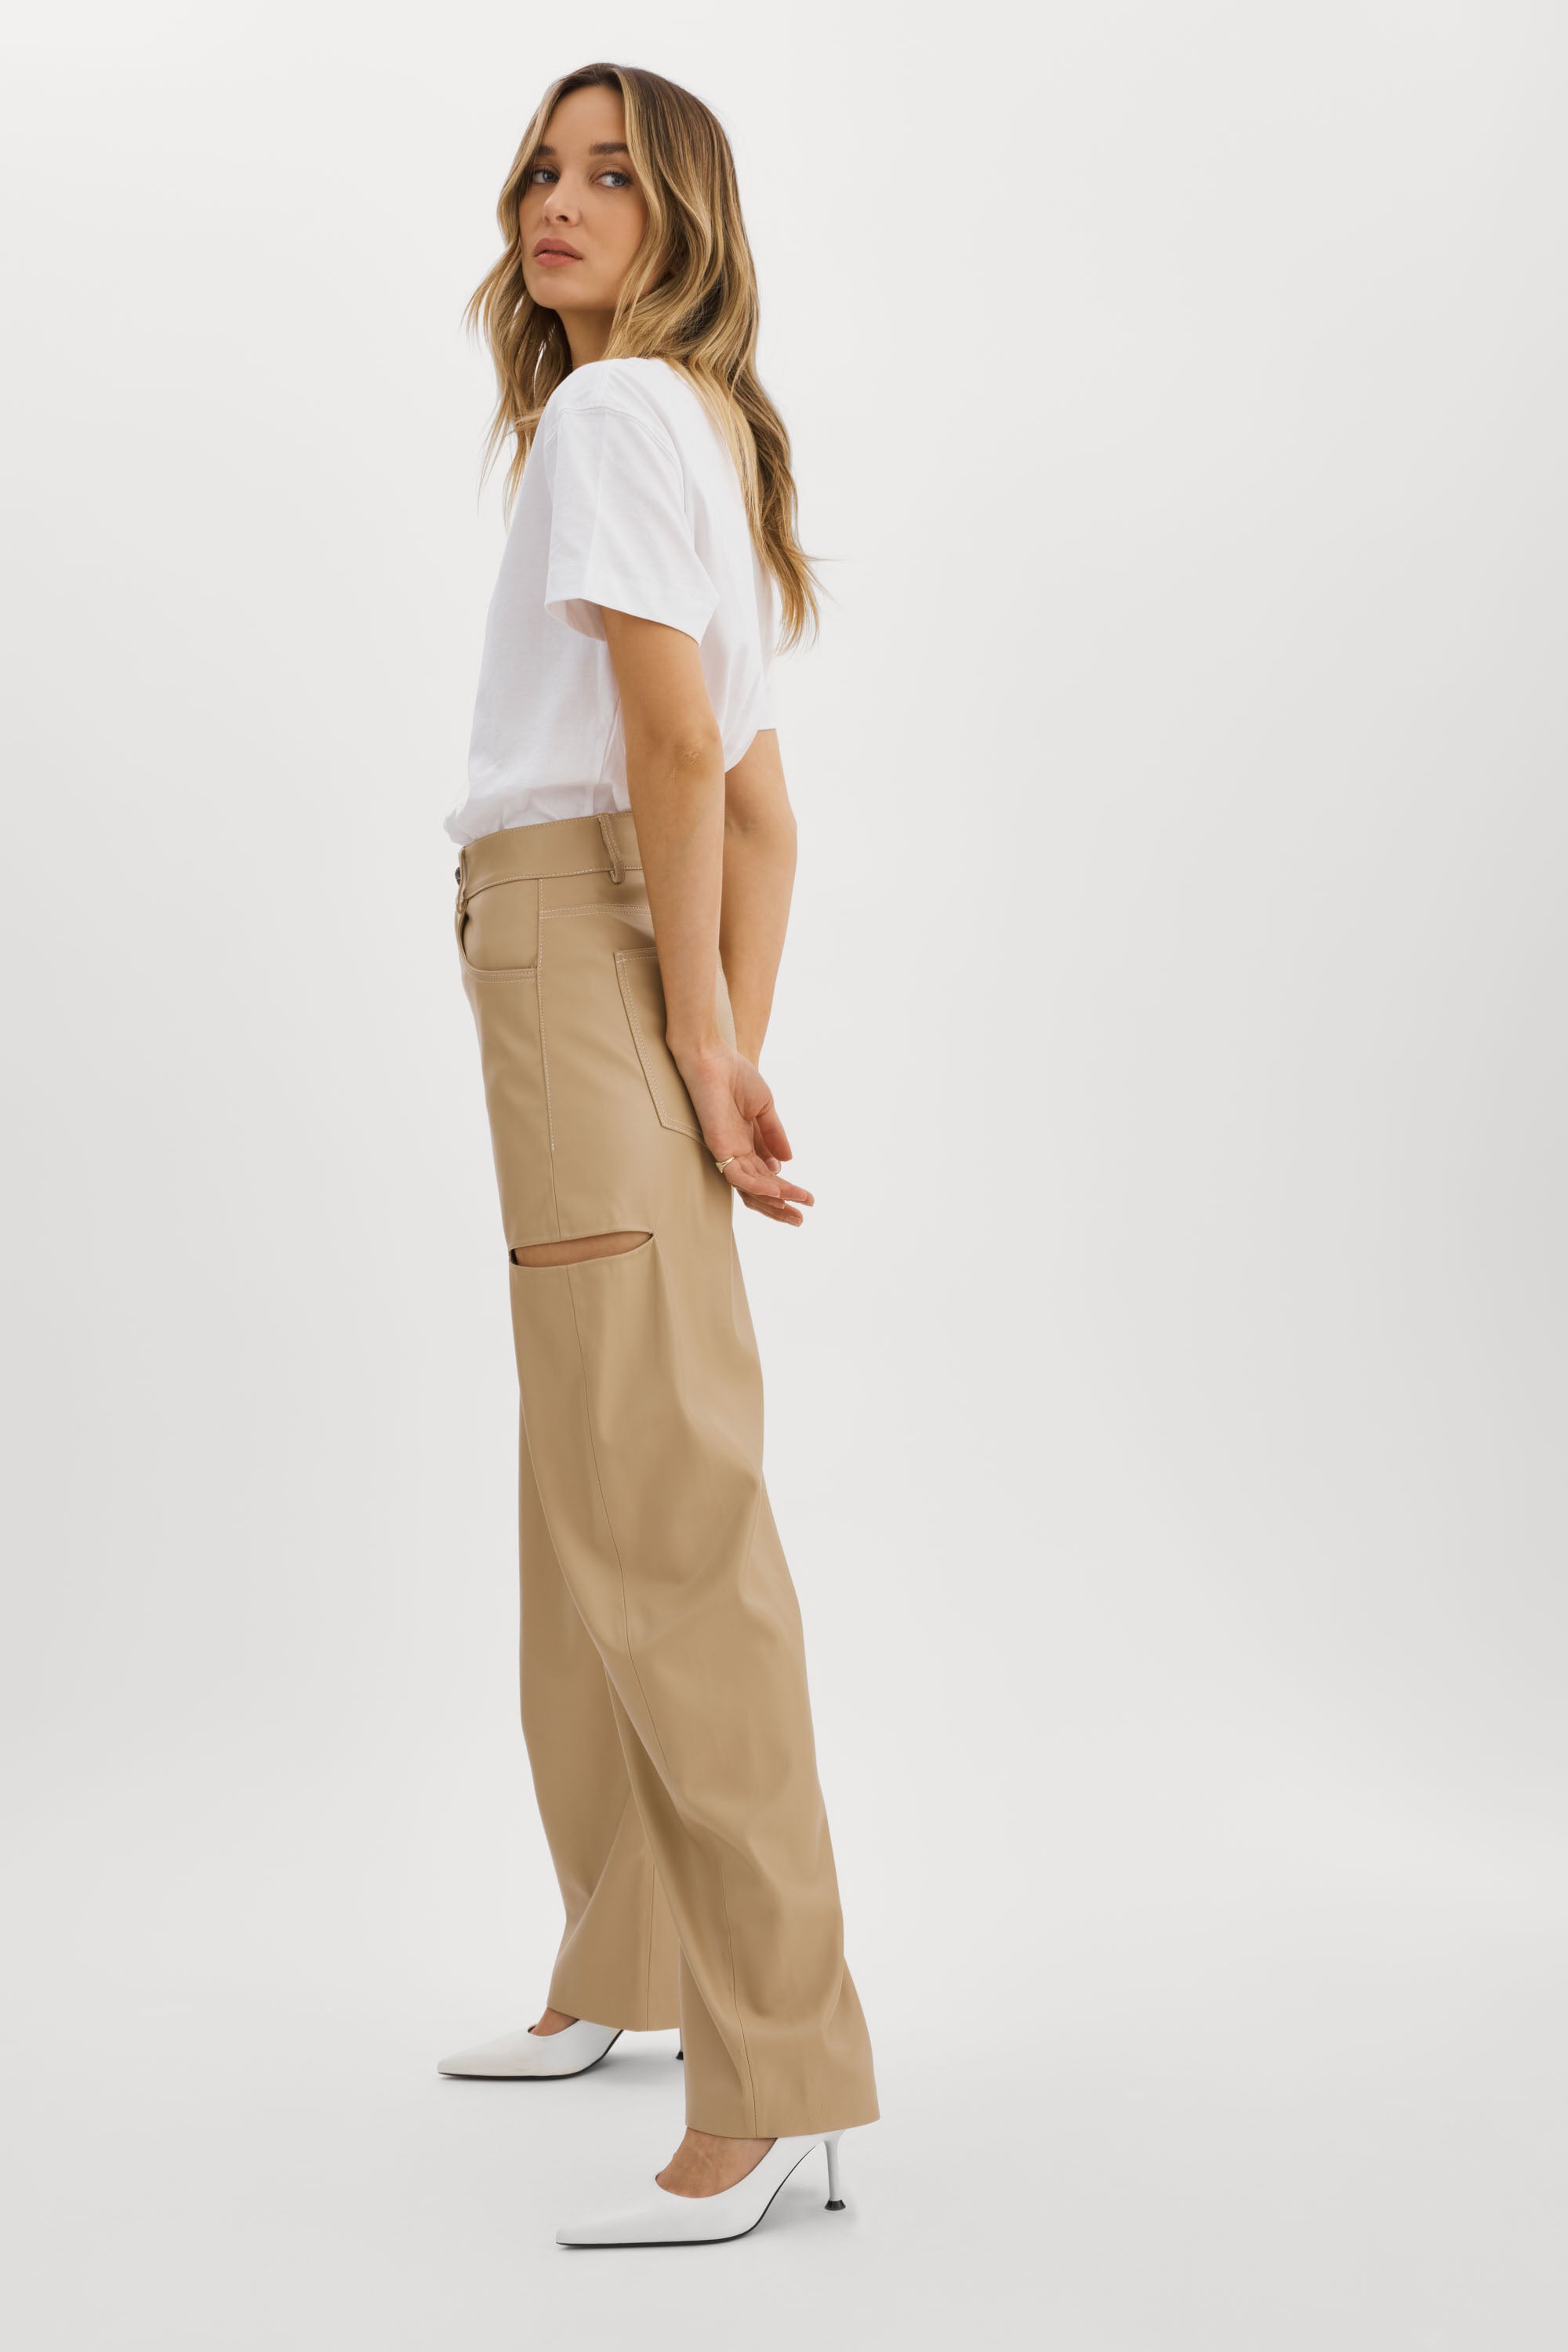 FALEEN | Faux Leather Loose Pants - Wheat / 24